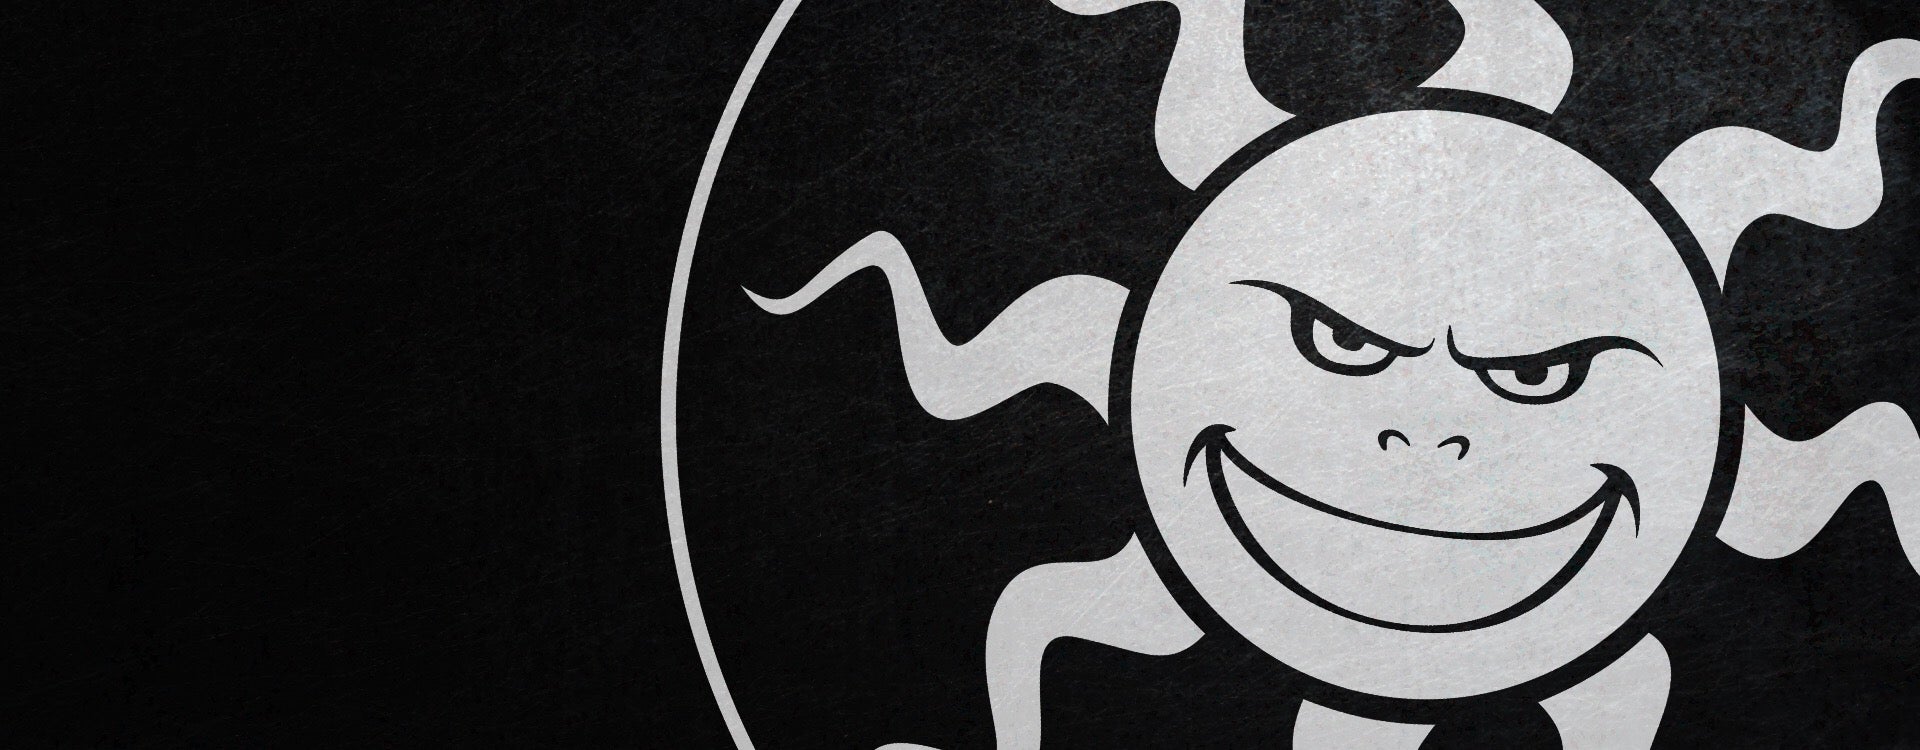 Image for Starbreeze lays off a quarter of its staff in further efforts to cut costs